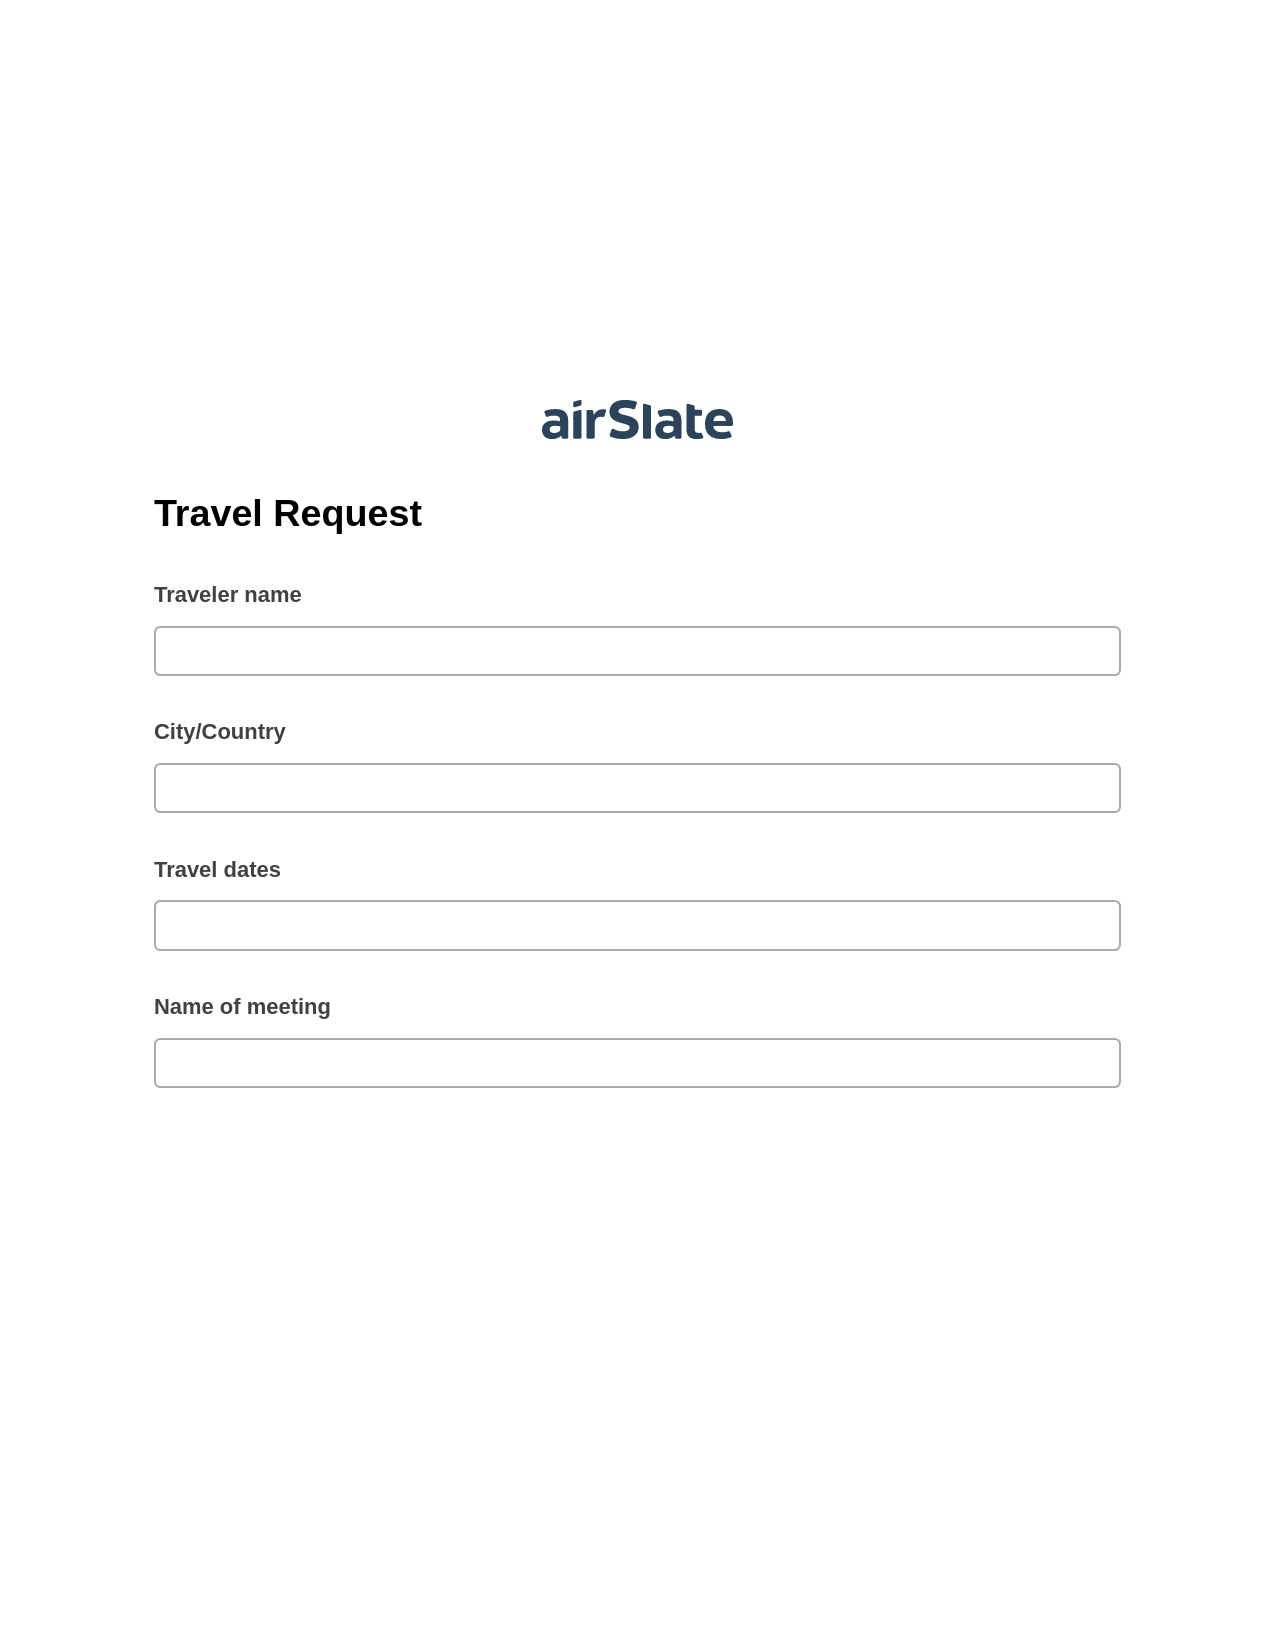 Travel Request Pre-fill Dropdowns from Excel Bot, Webhook Bot, OneDrive Bot